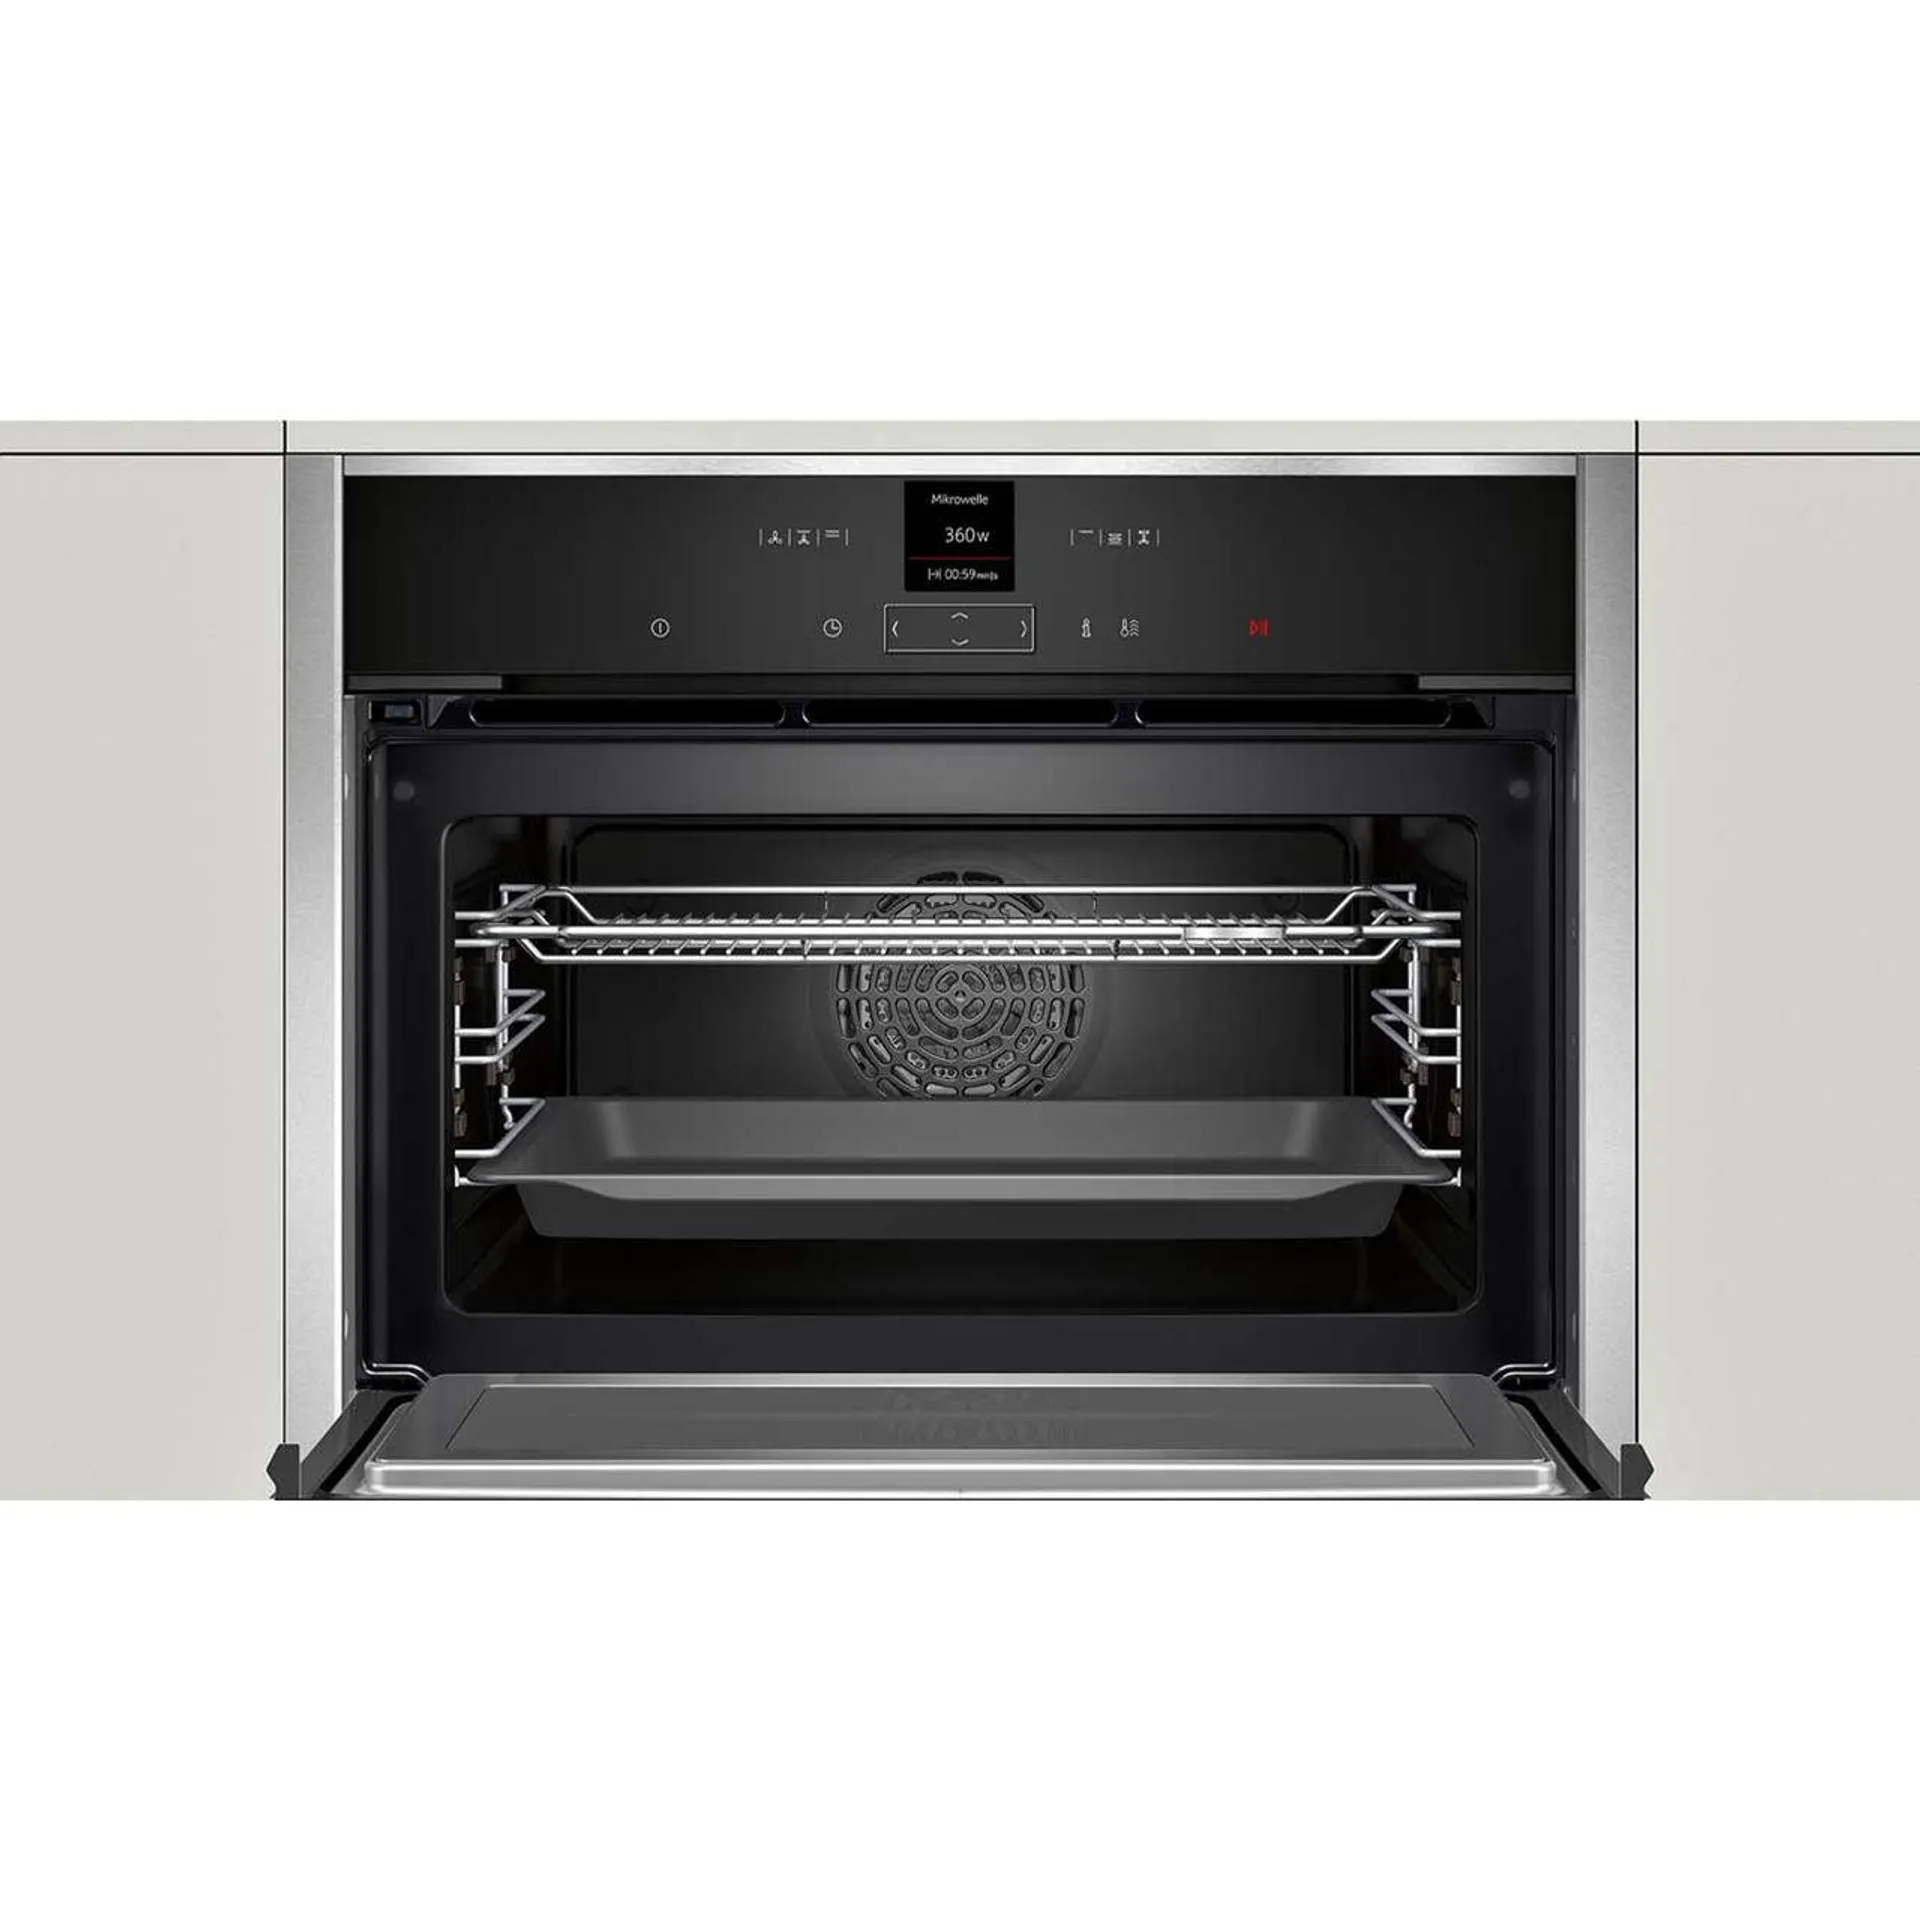 NEFF N70 C17MR02N0B Built In Compact Electric Single Oven with Microwave Function - Stainless Steel